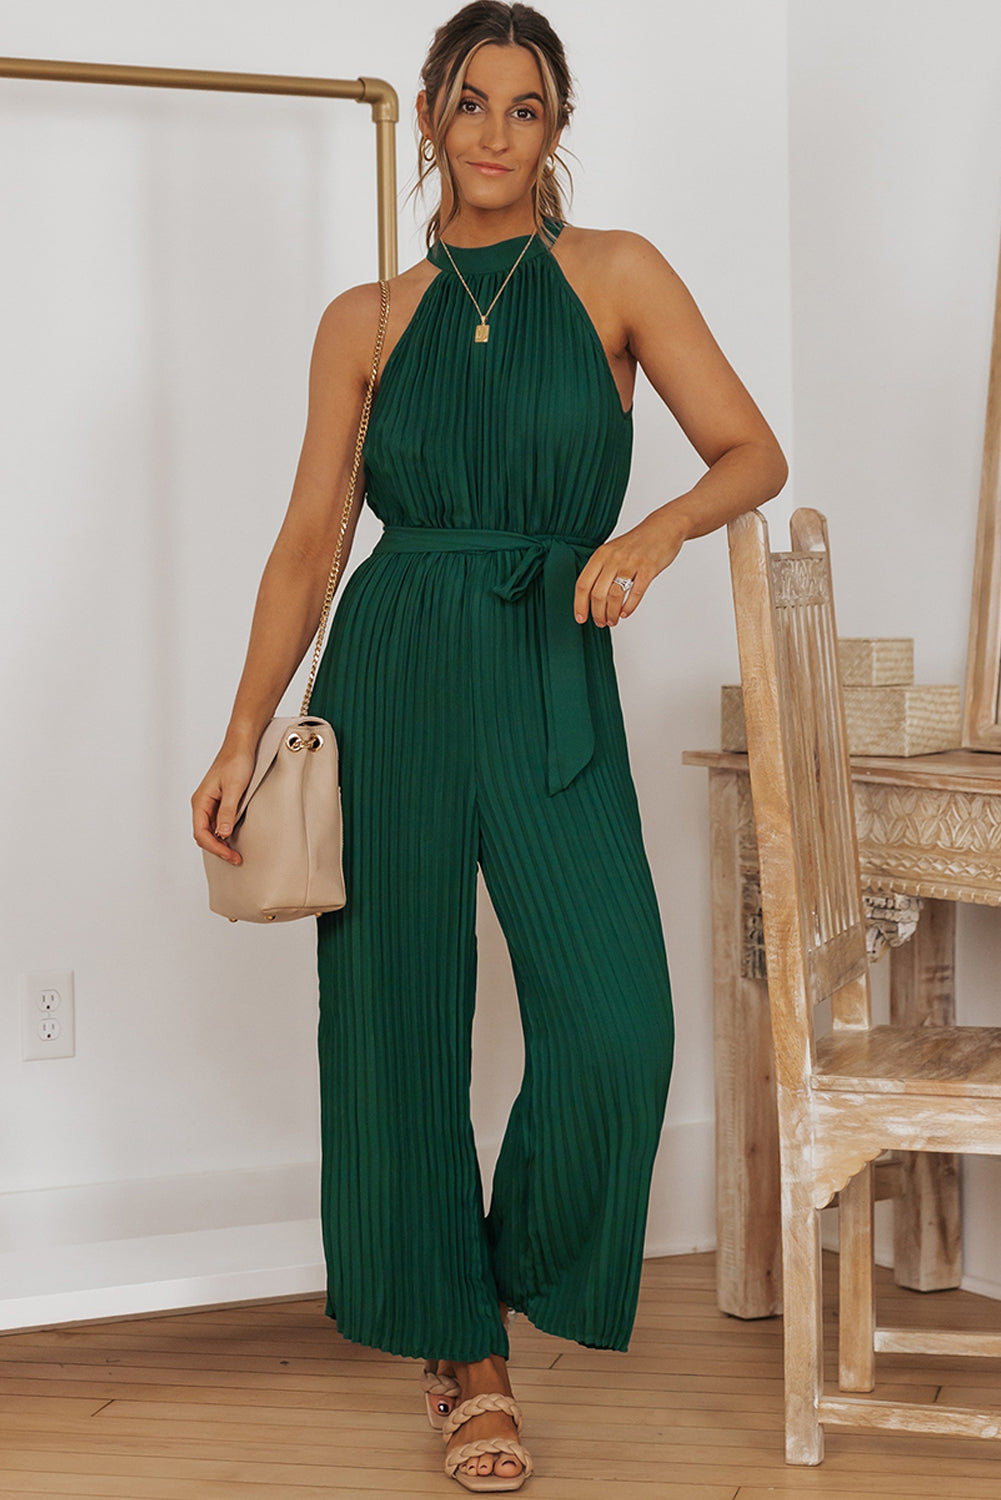 Buy Accordion Pleated Belted Grecian Neck Sleeveless Jumpsuit by Faz